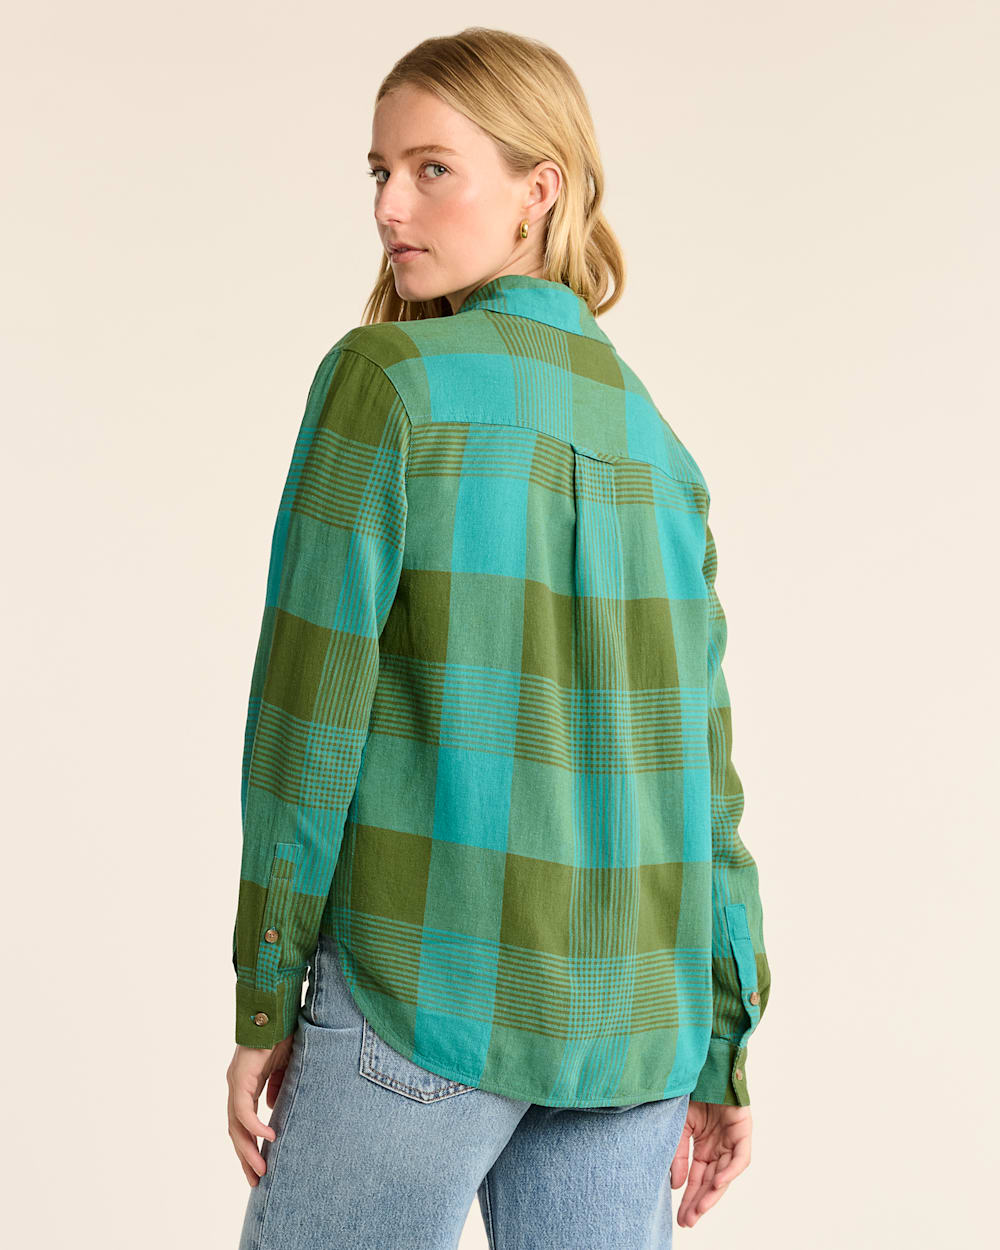 ALTERNATE VIEW OF WOMEN'S ADLEY LINEN-BLEND SHIRT IN TEAL/GREEN CHECK image number 3